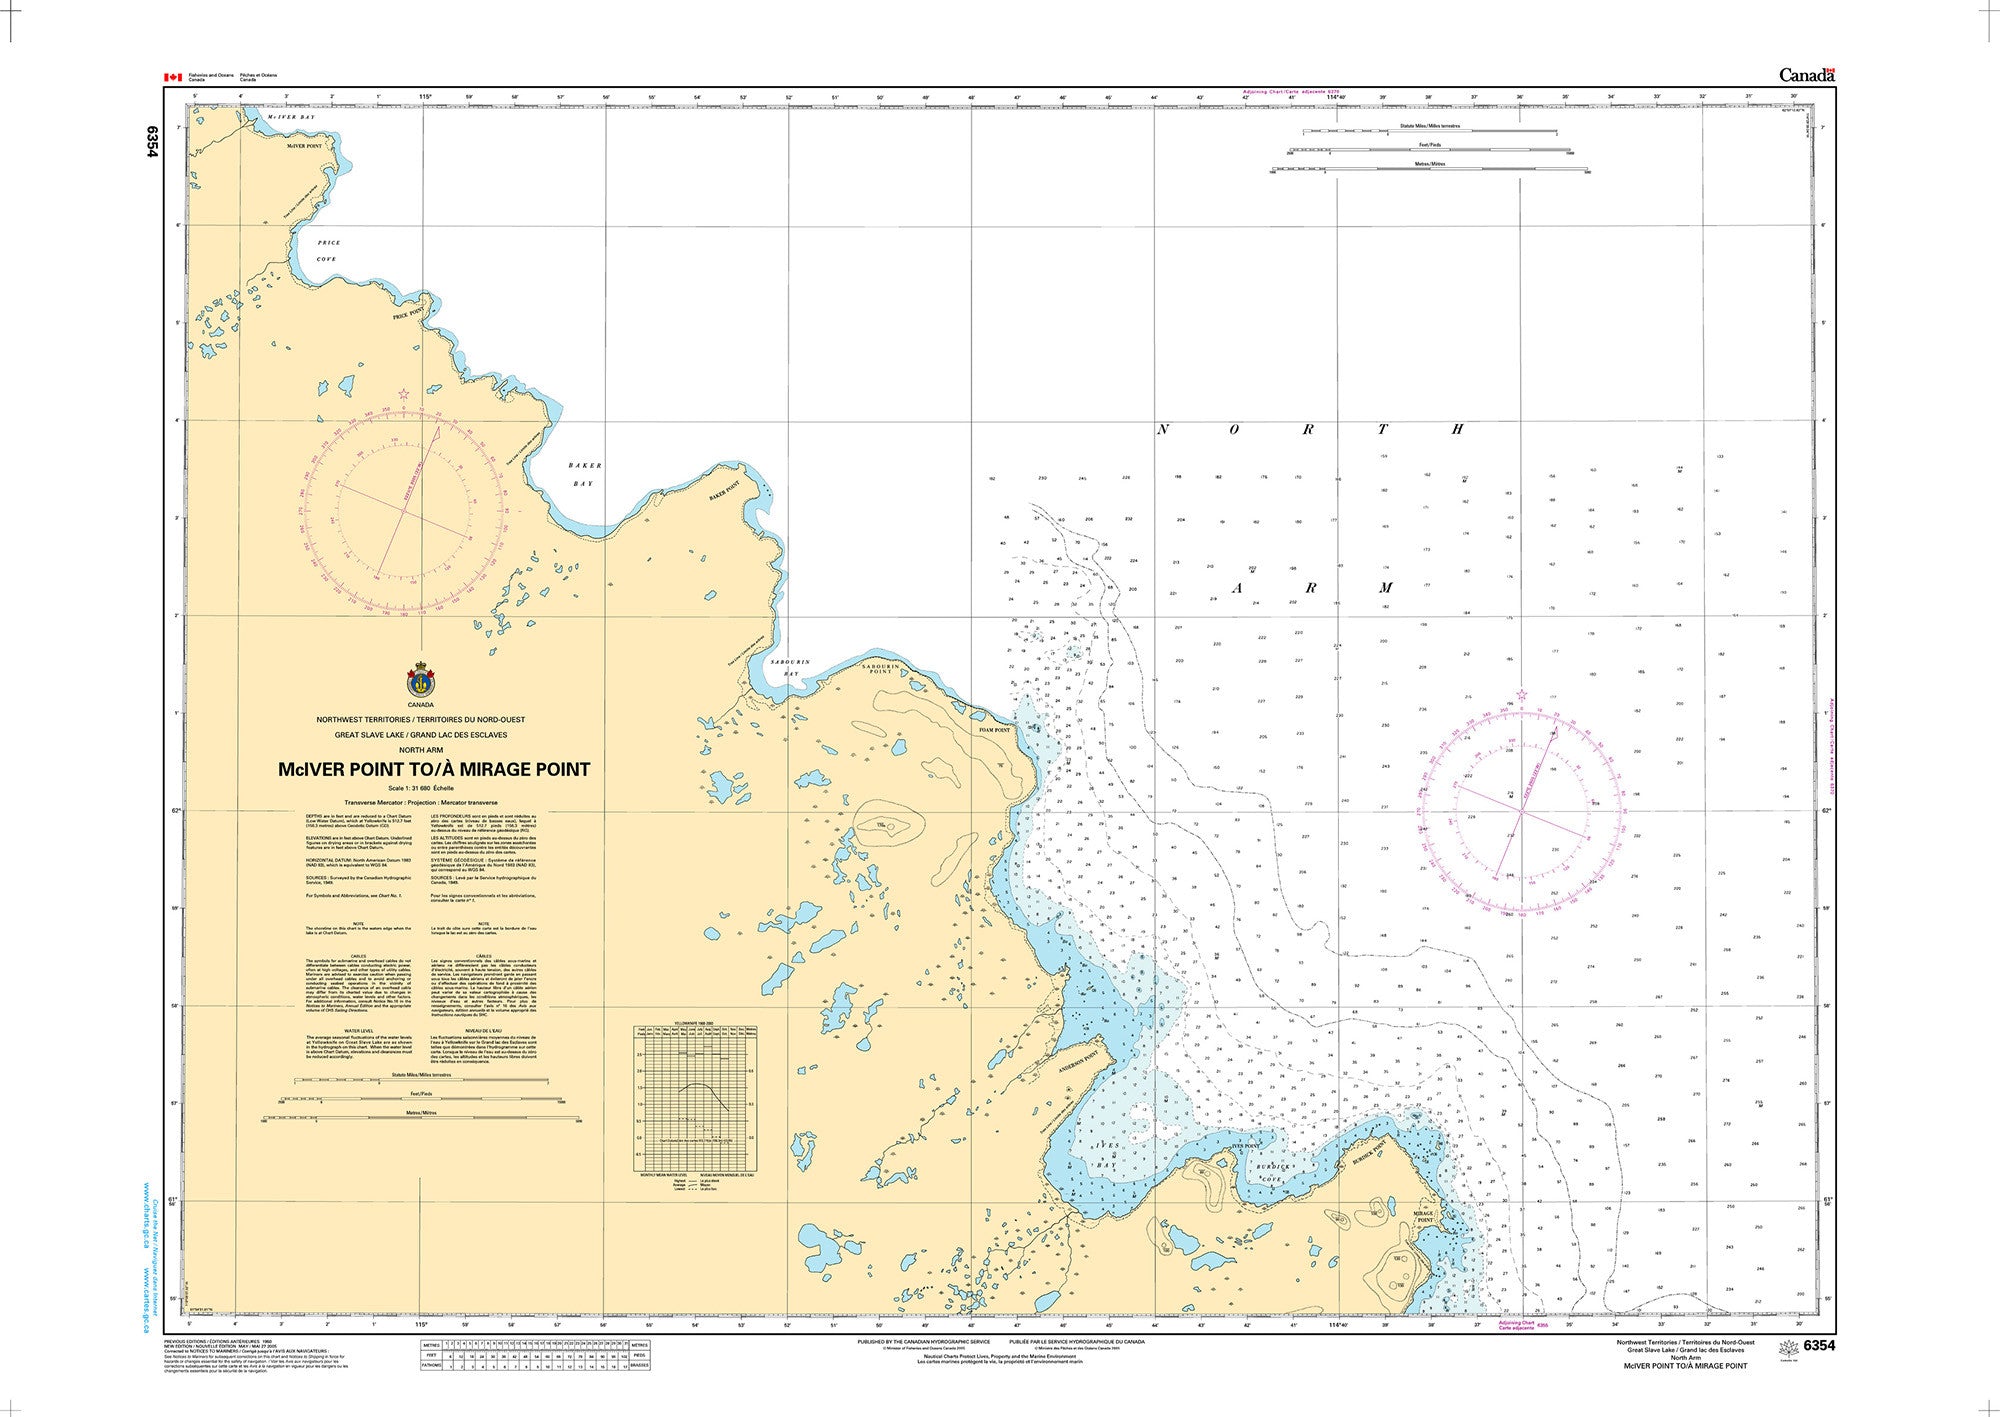 Canadian Hydrographic Service Nautical Chart CHS6354: McIver Point to/à Mirage Point